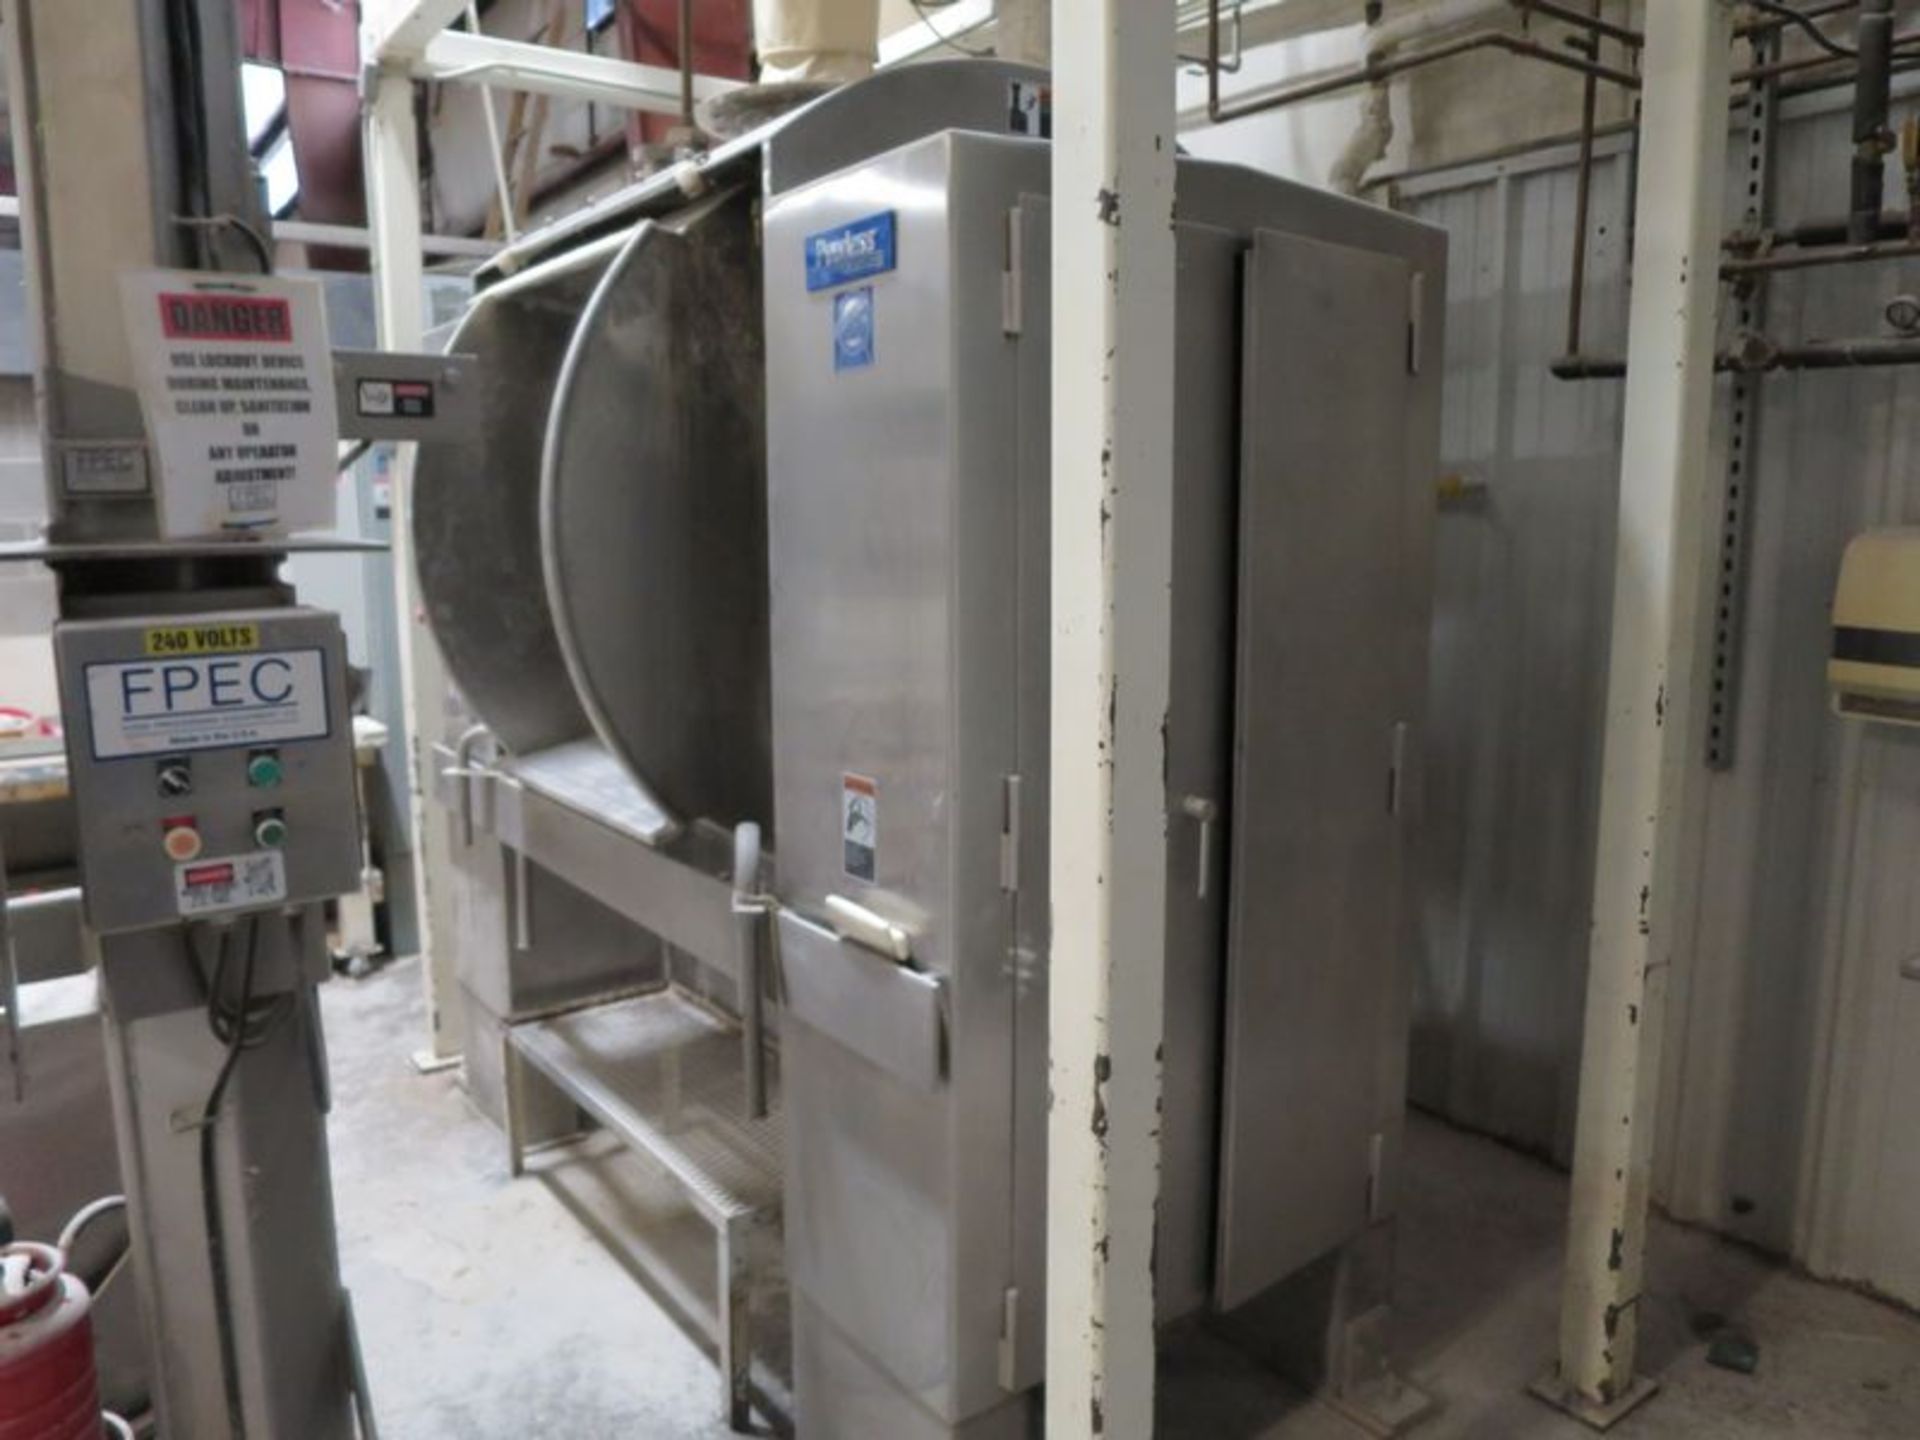 Peerless 600 lb roller bar mixer, model HS6, s/n 209129, installed in 2011, jacketed bowl, plc - Image 5 of 9